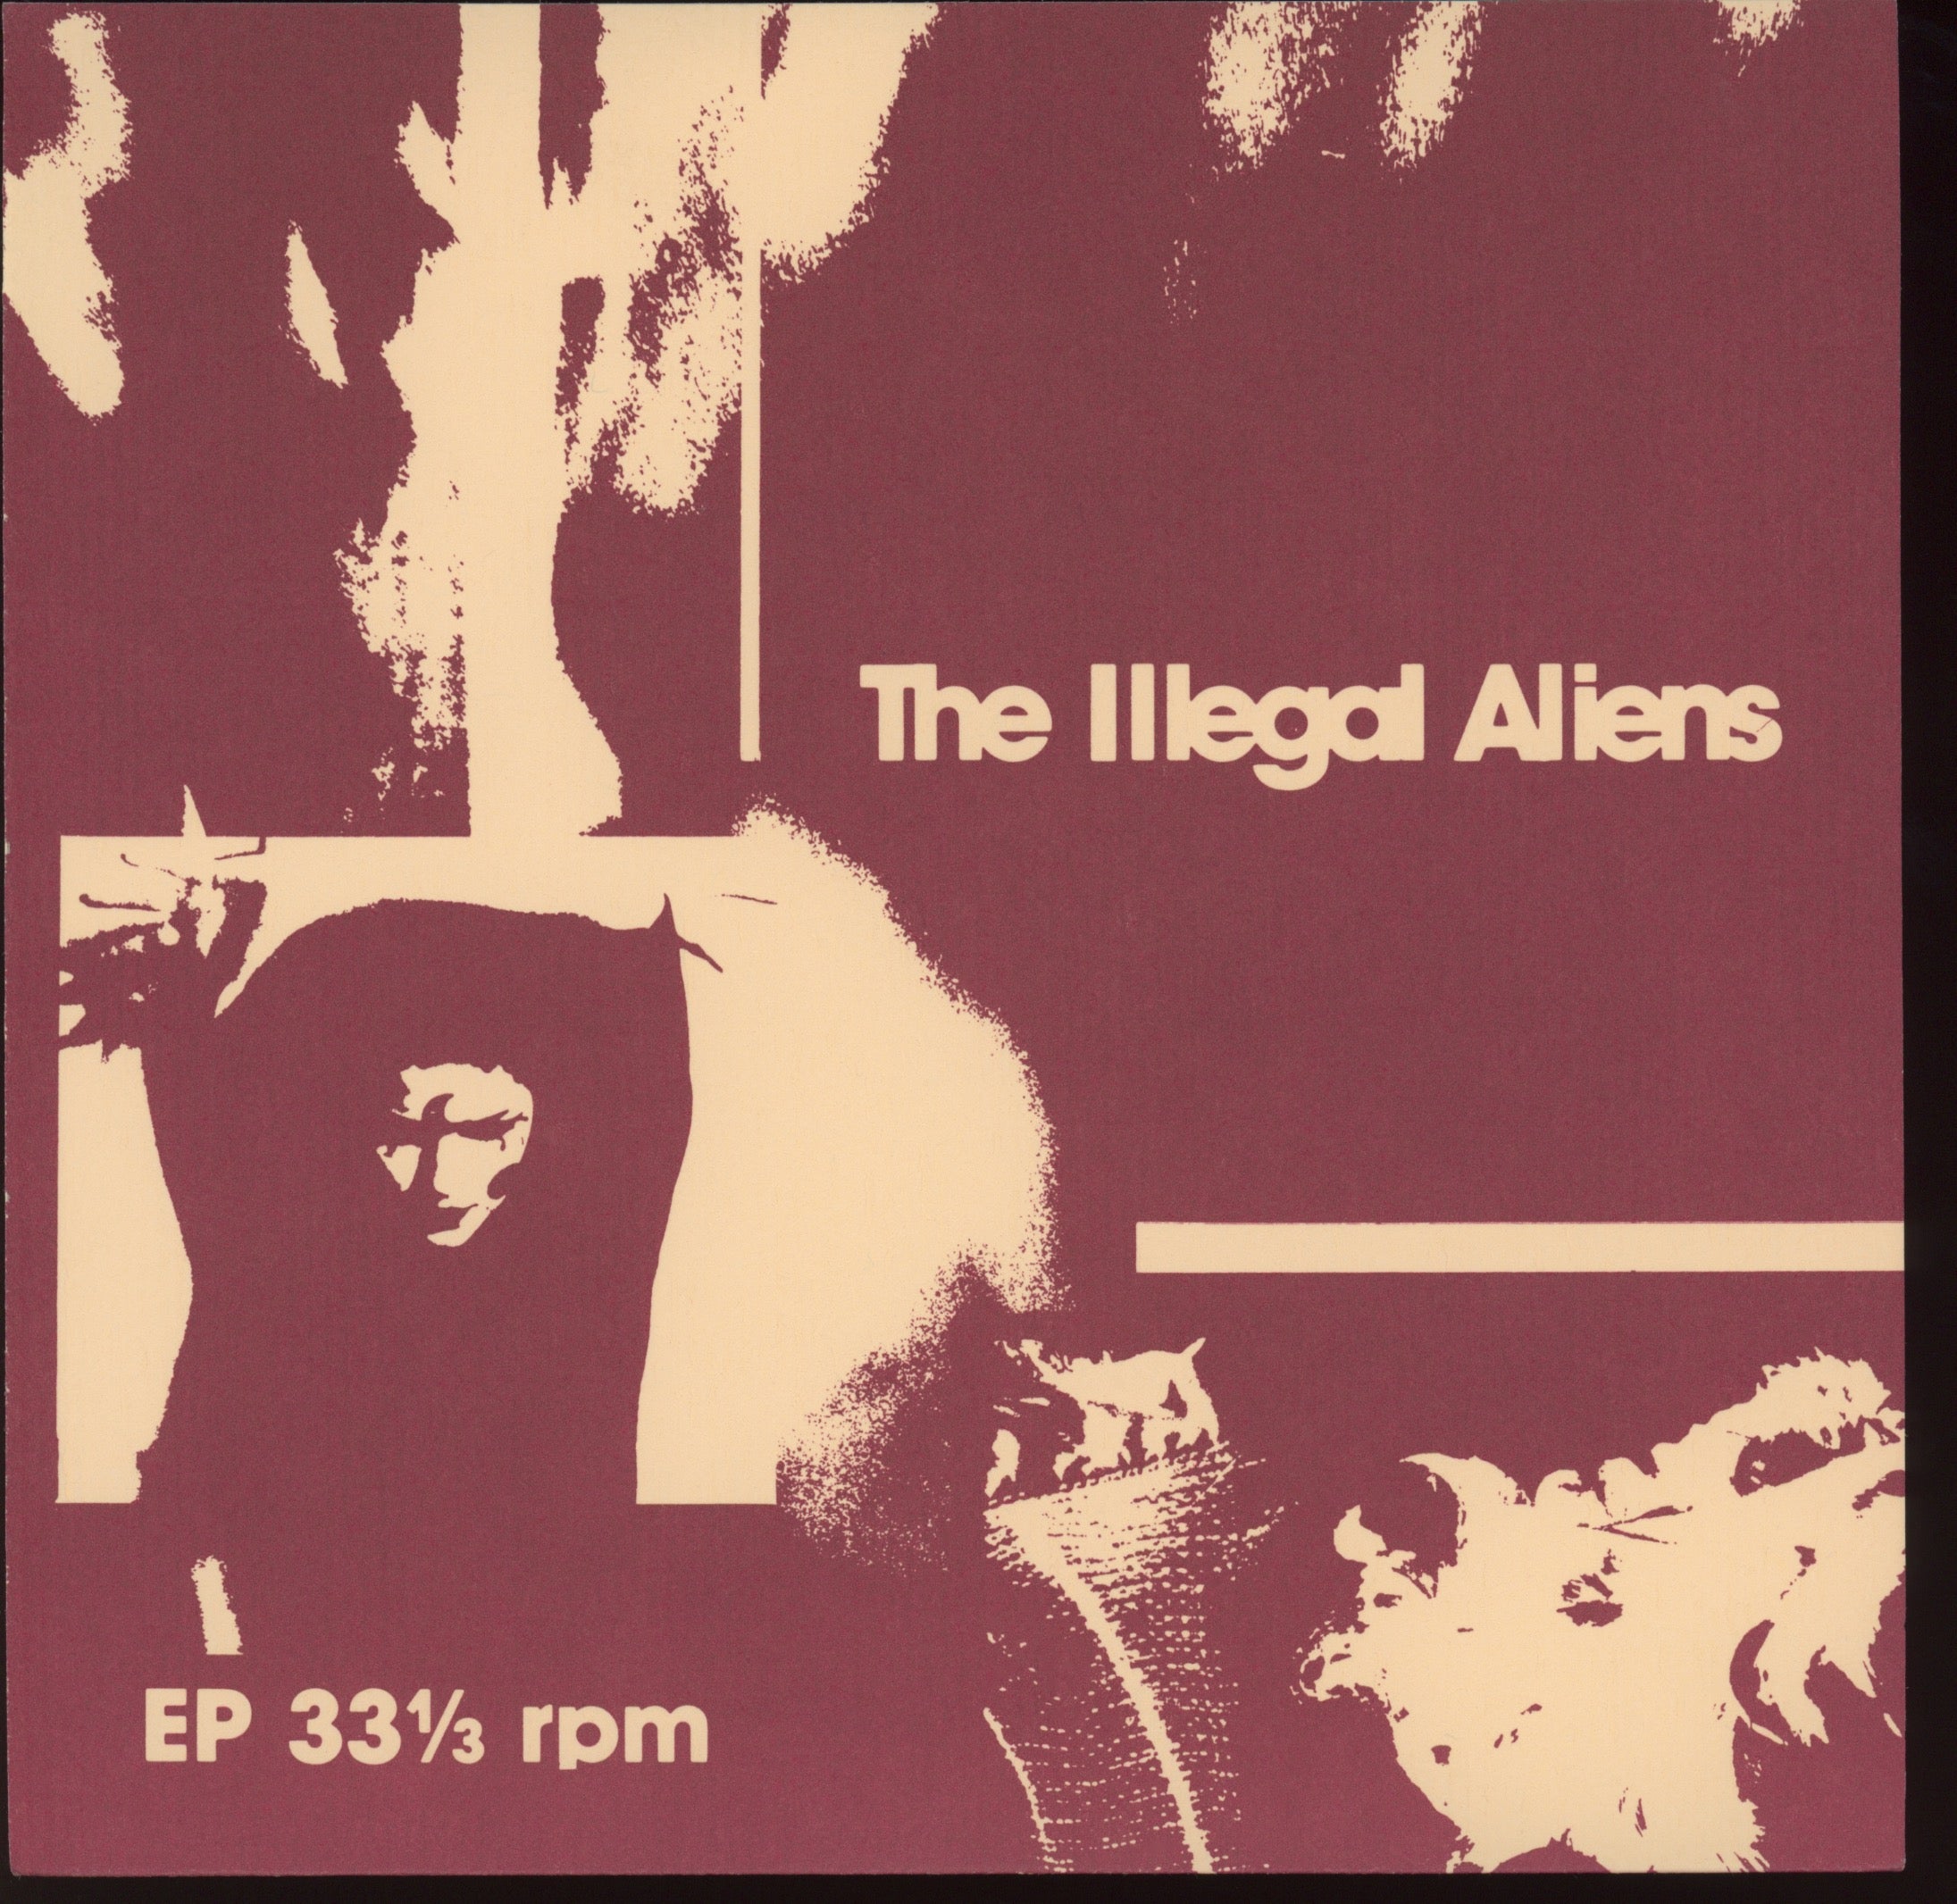 The Illegal Aliens - The Illegal Aliens on Dogmatic 7" EP